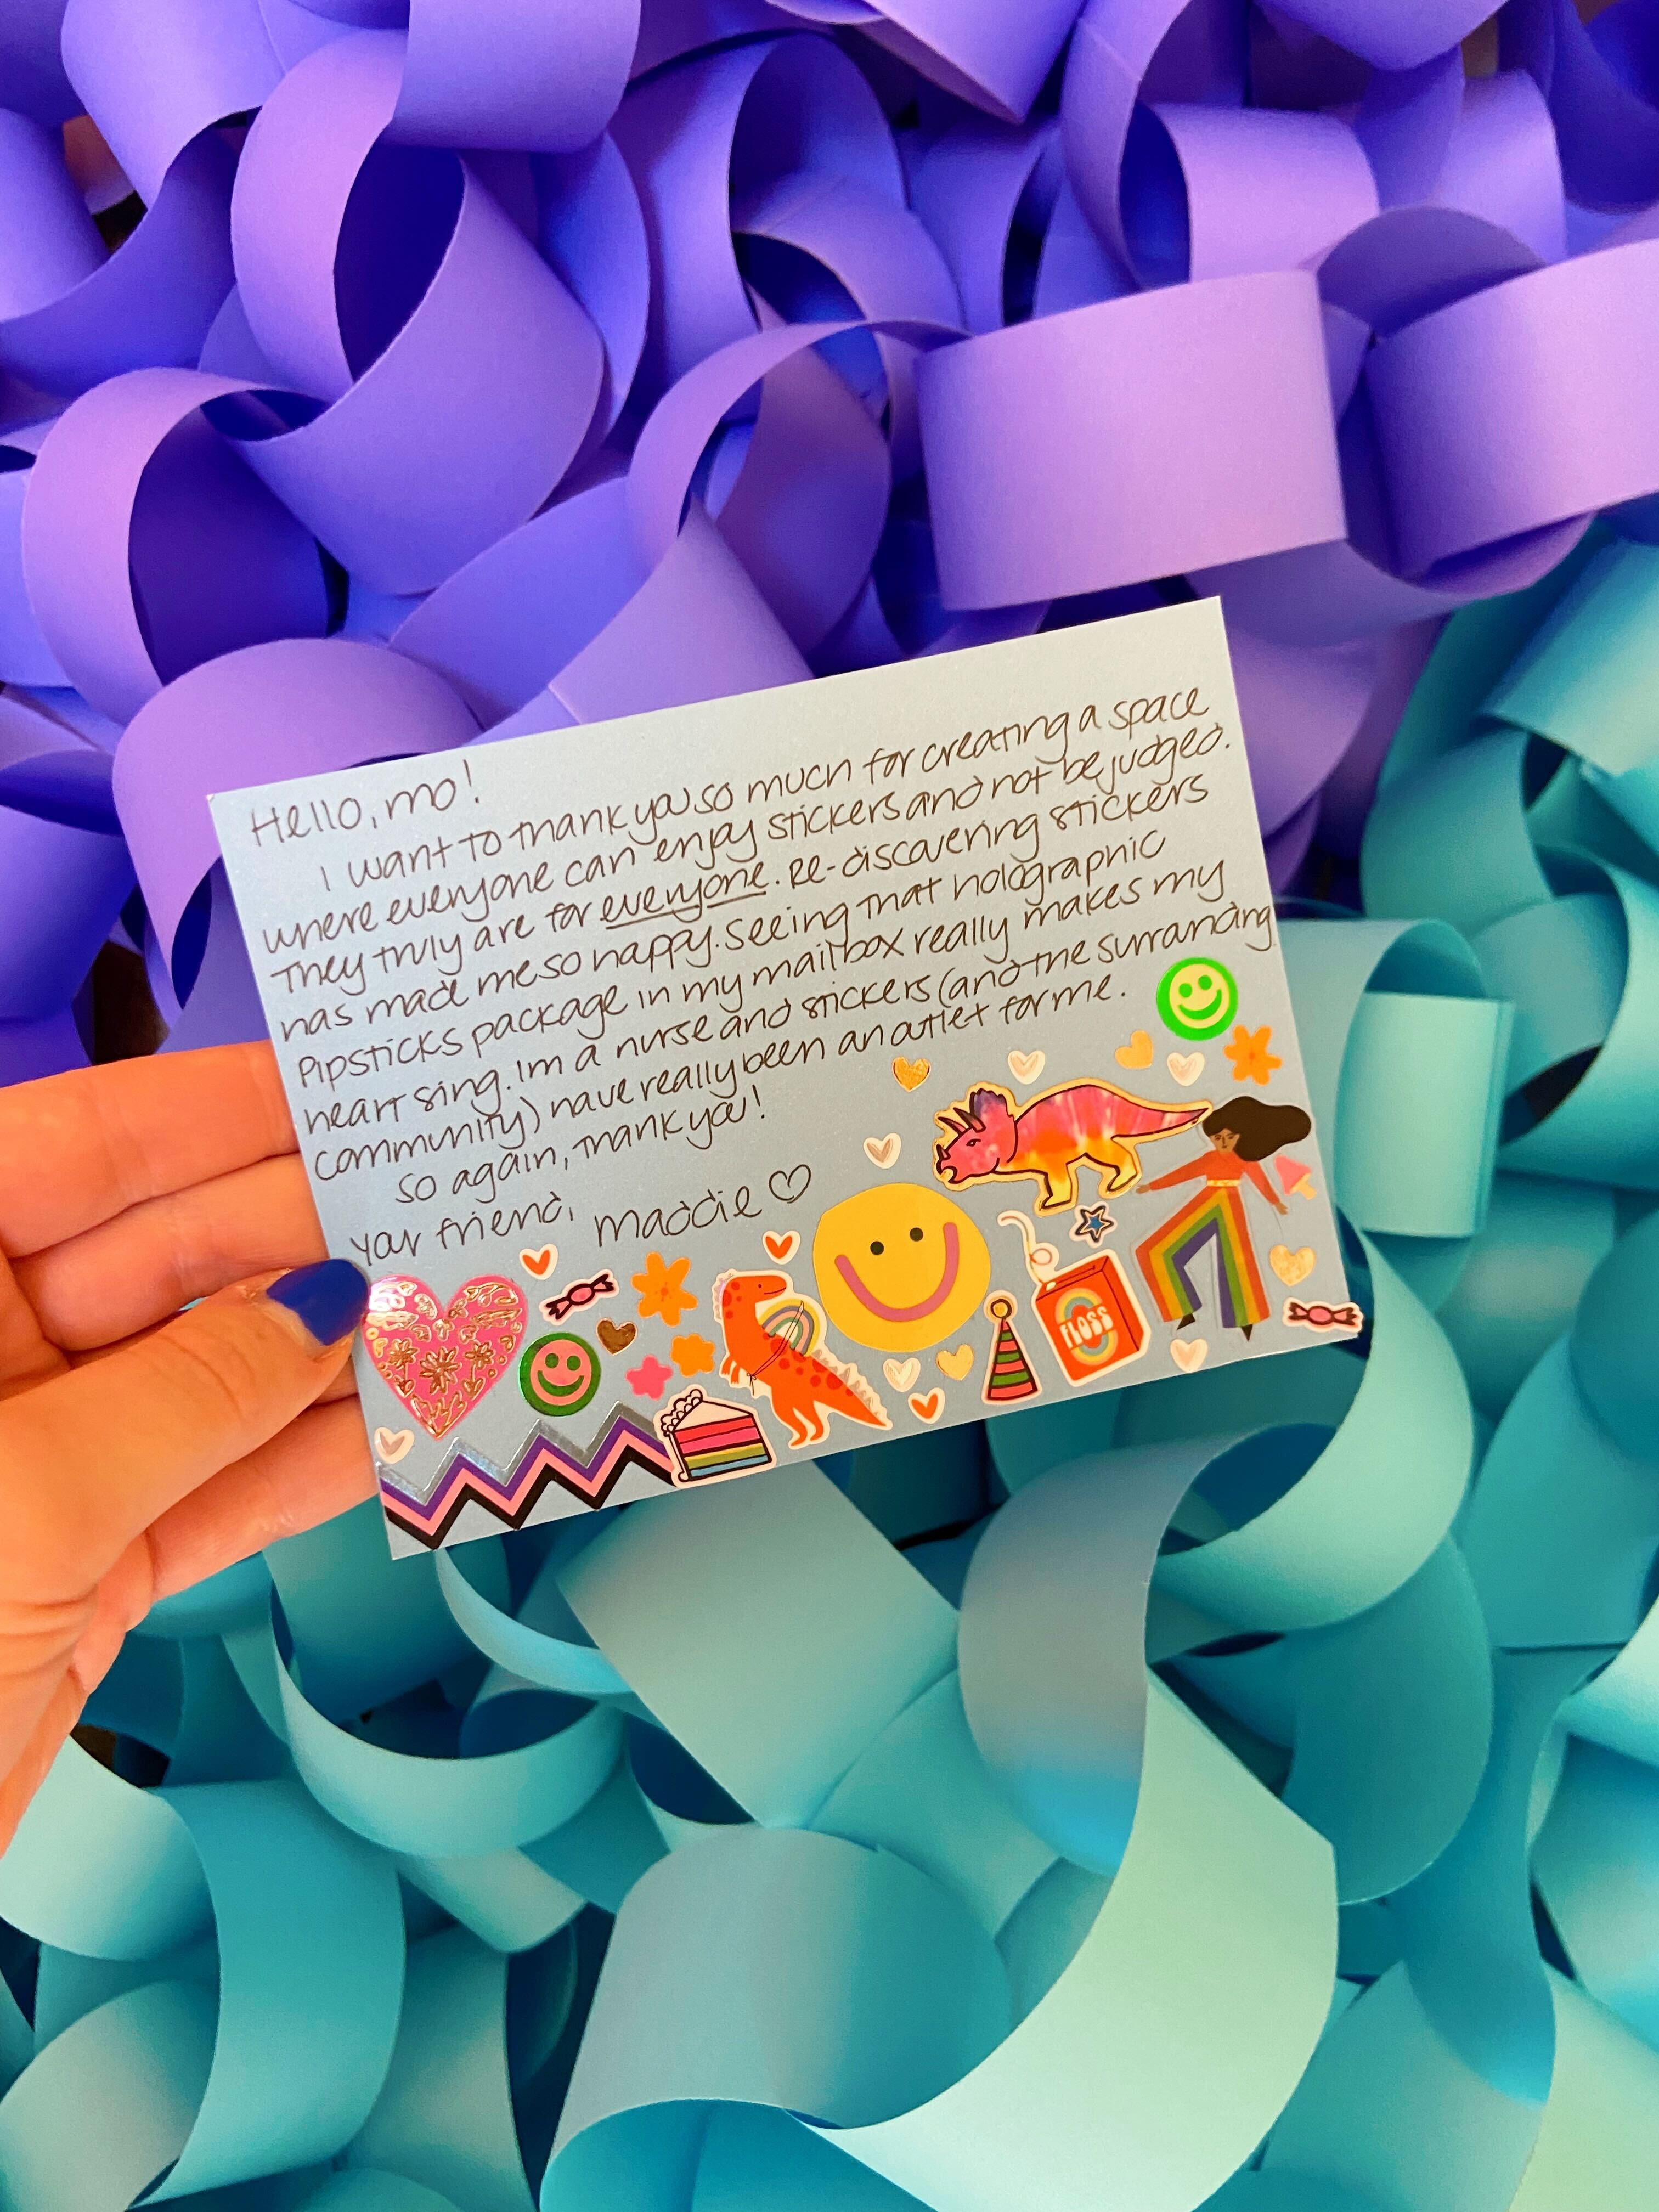 Fan Mail Friday: “A space where everyone can enjoy stickers”